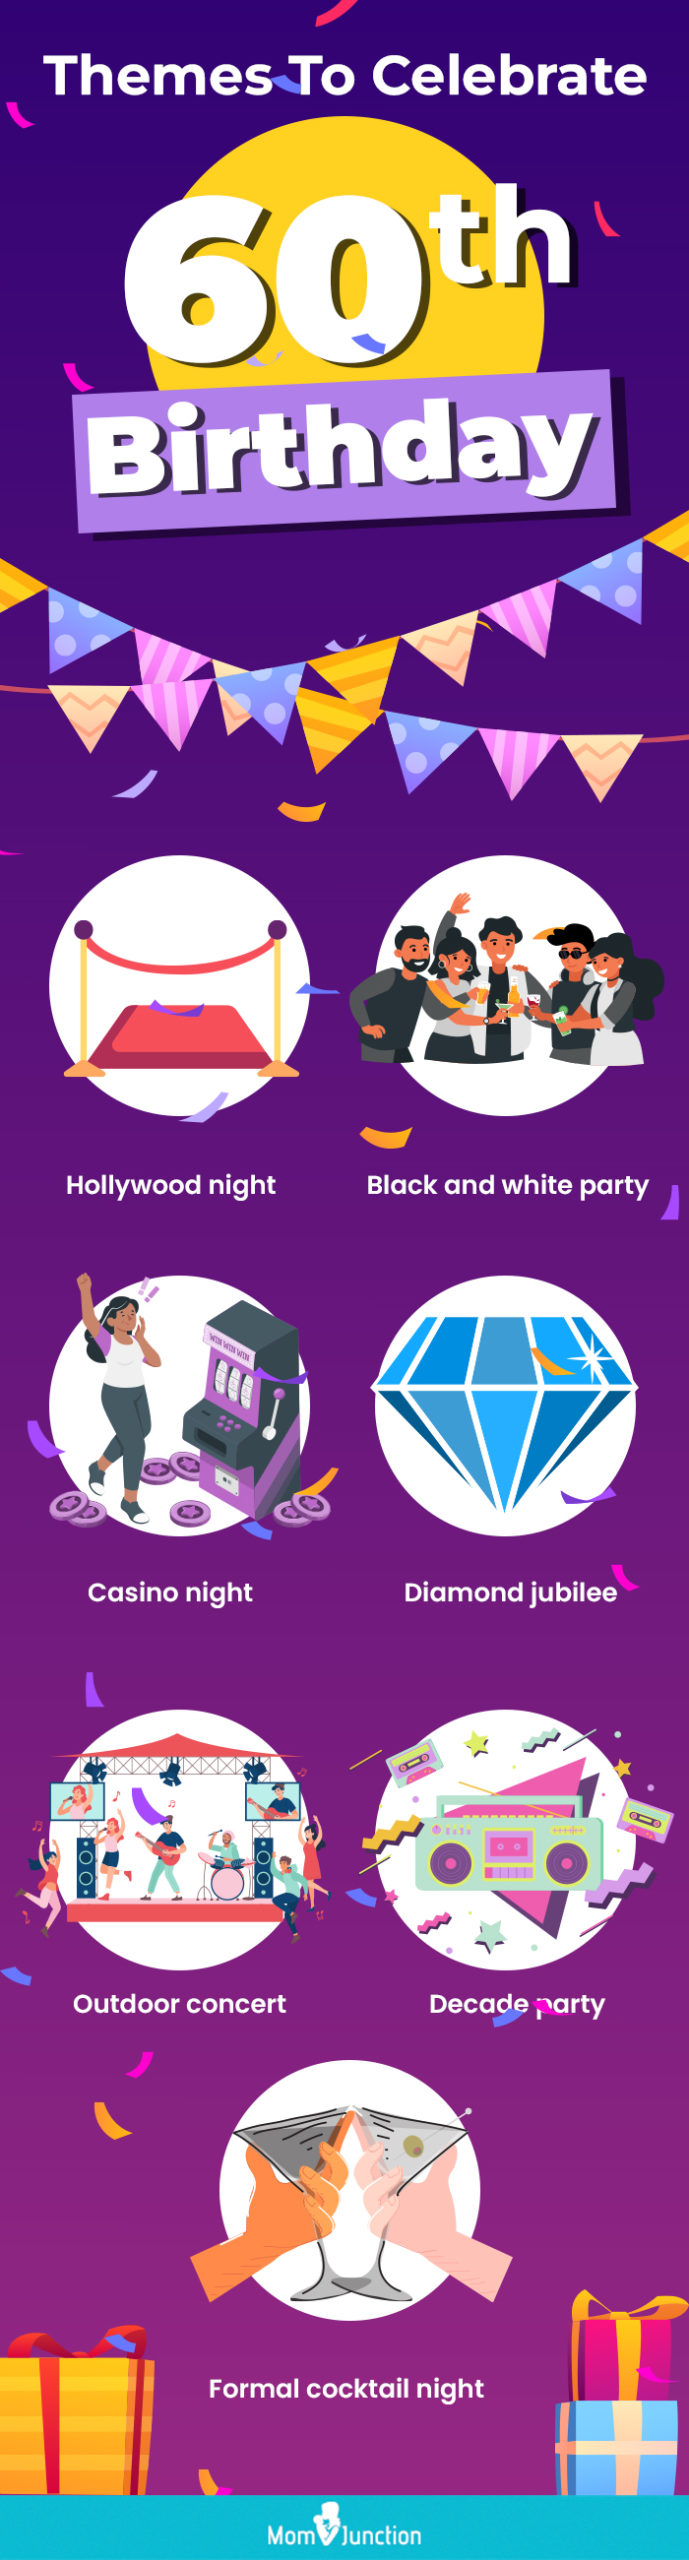 themes to celebrate 60th birthday (infographic)